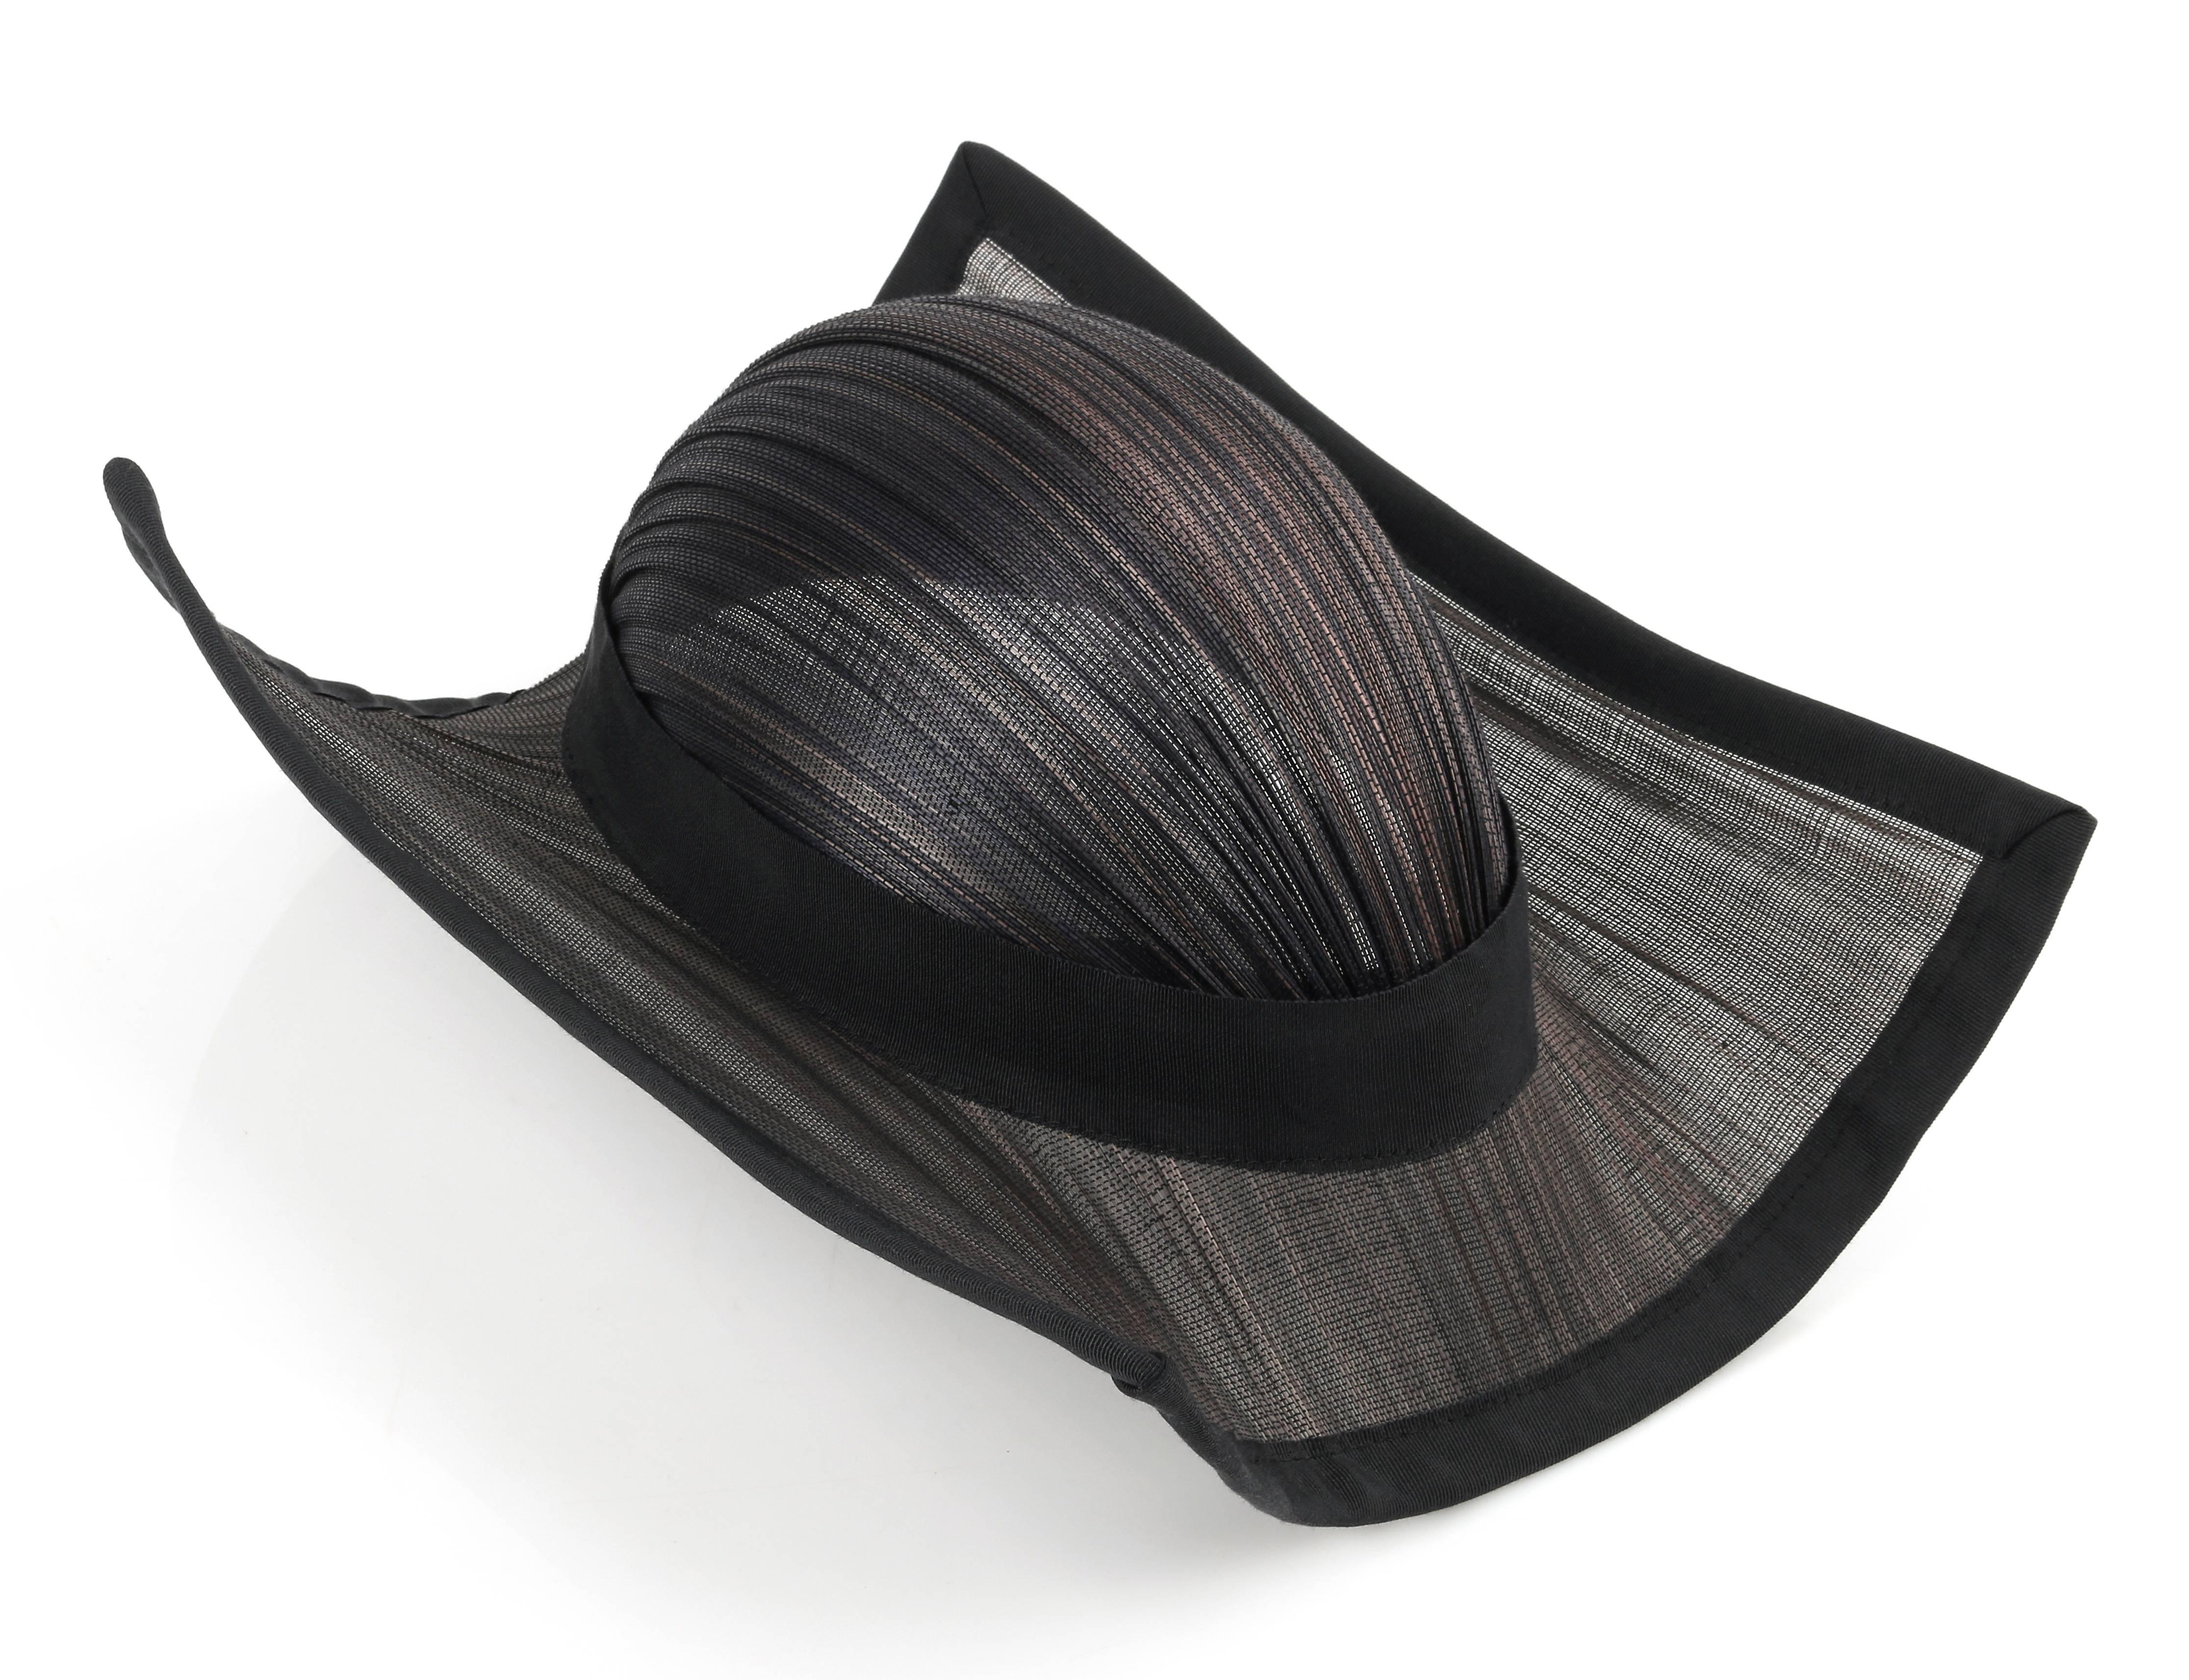 Couture Kate Bishop black grasscloth wire framed sculptural hat. Designed by Kate Bishop; one of the milliners for the movie 'Titanic'. Semi-sheer grasscloth body striped with shades of black, brown, and gray. Narrow rounded crown with knife pleat